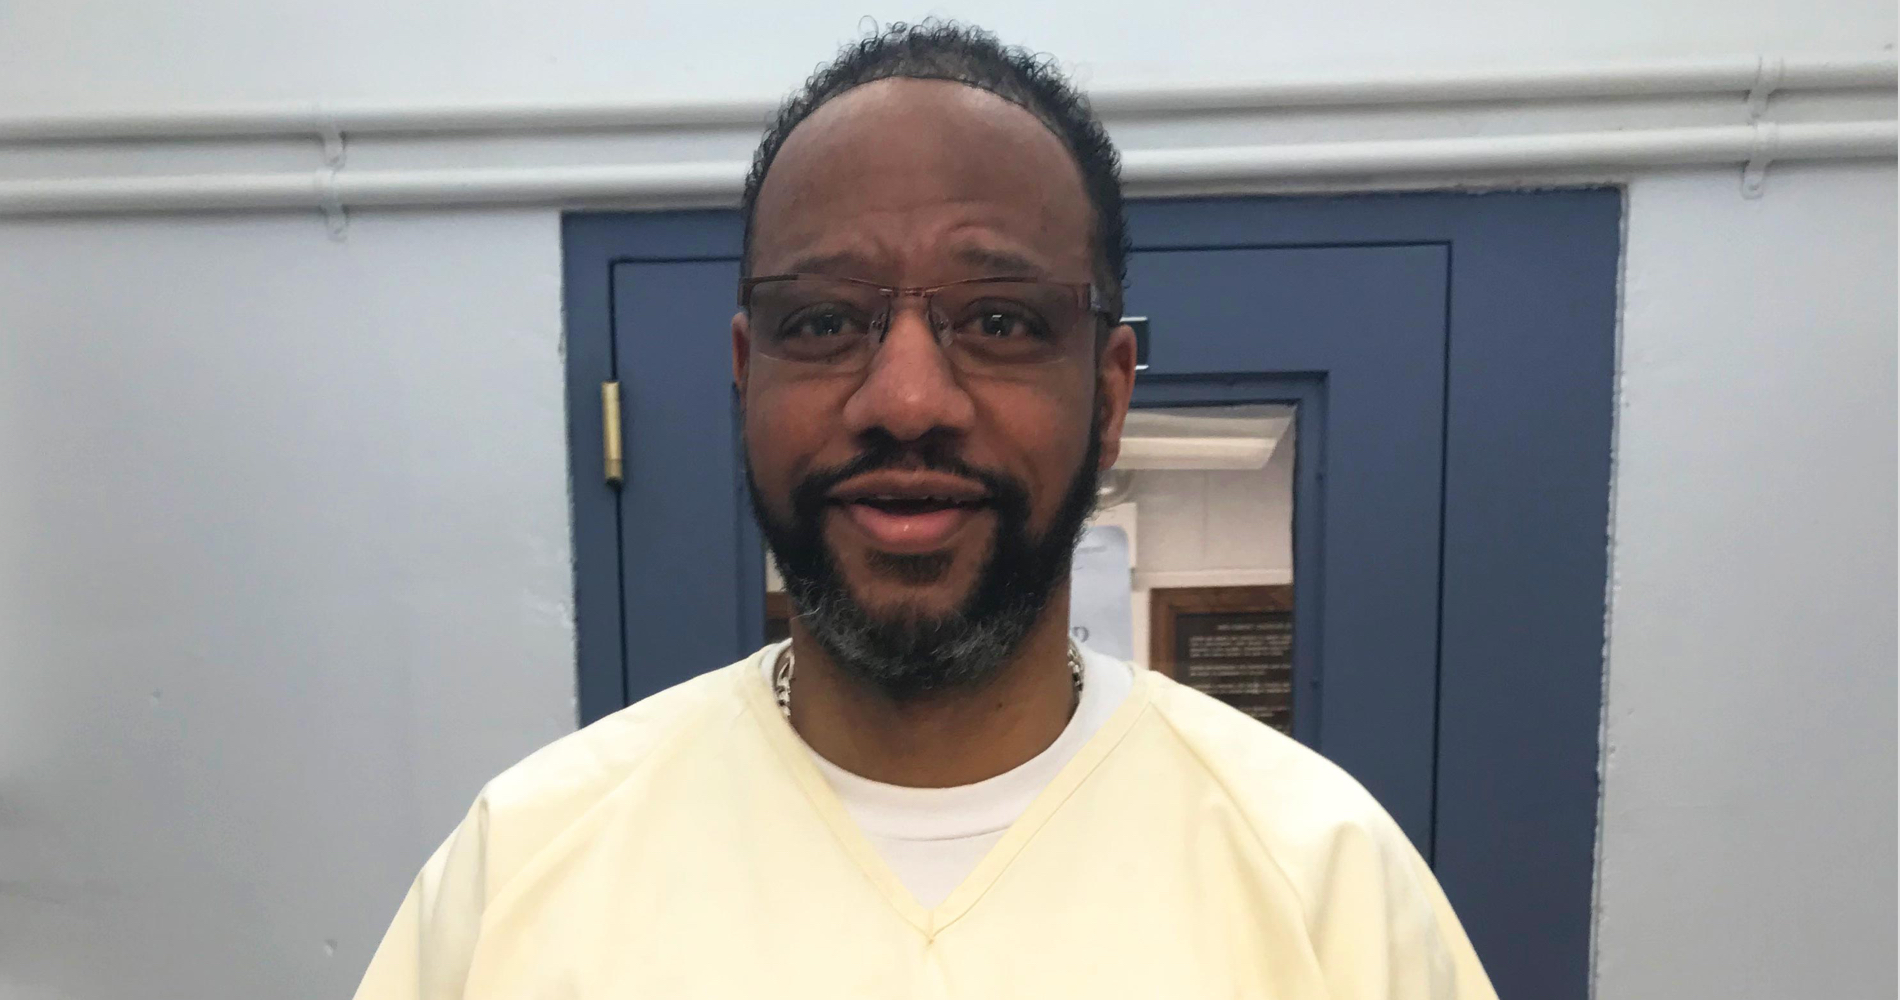 https://innocenceproject.org/pervis-payne-wrongful-conviction-what-to-know-innocent-tennessee/